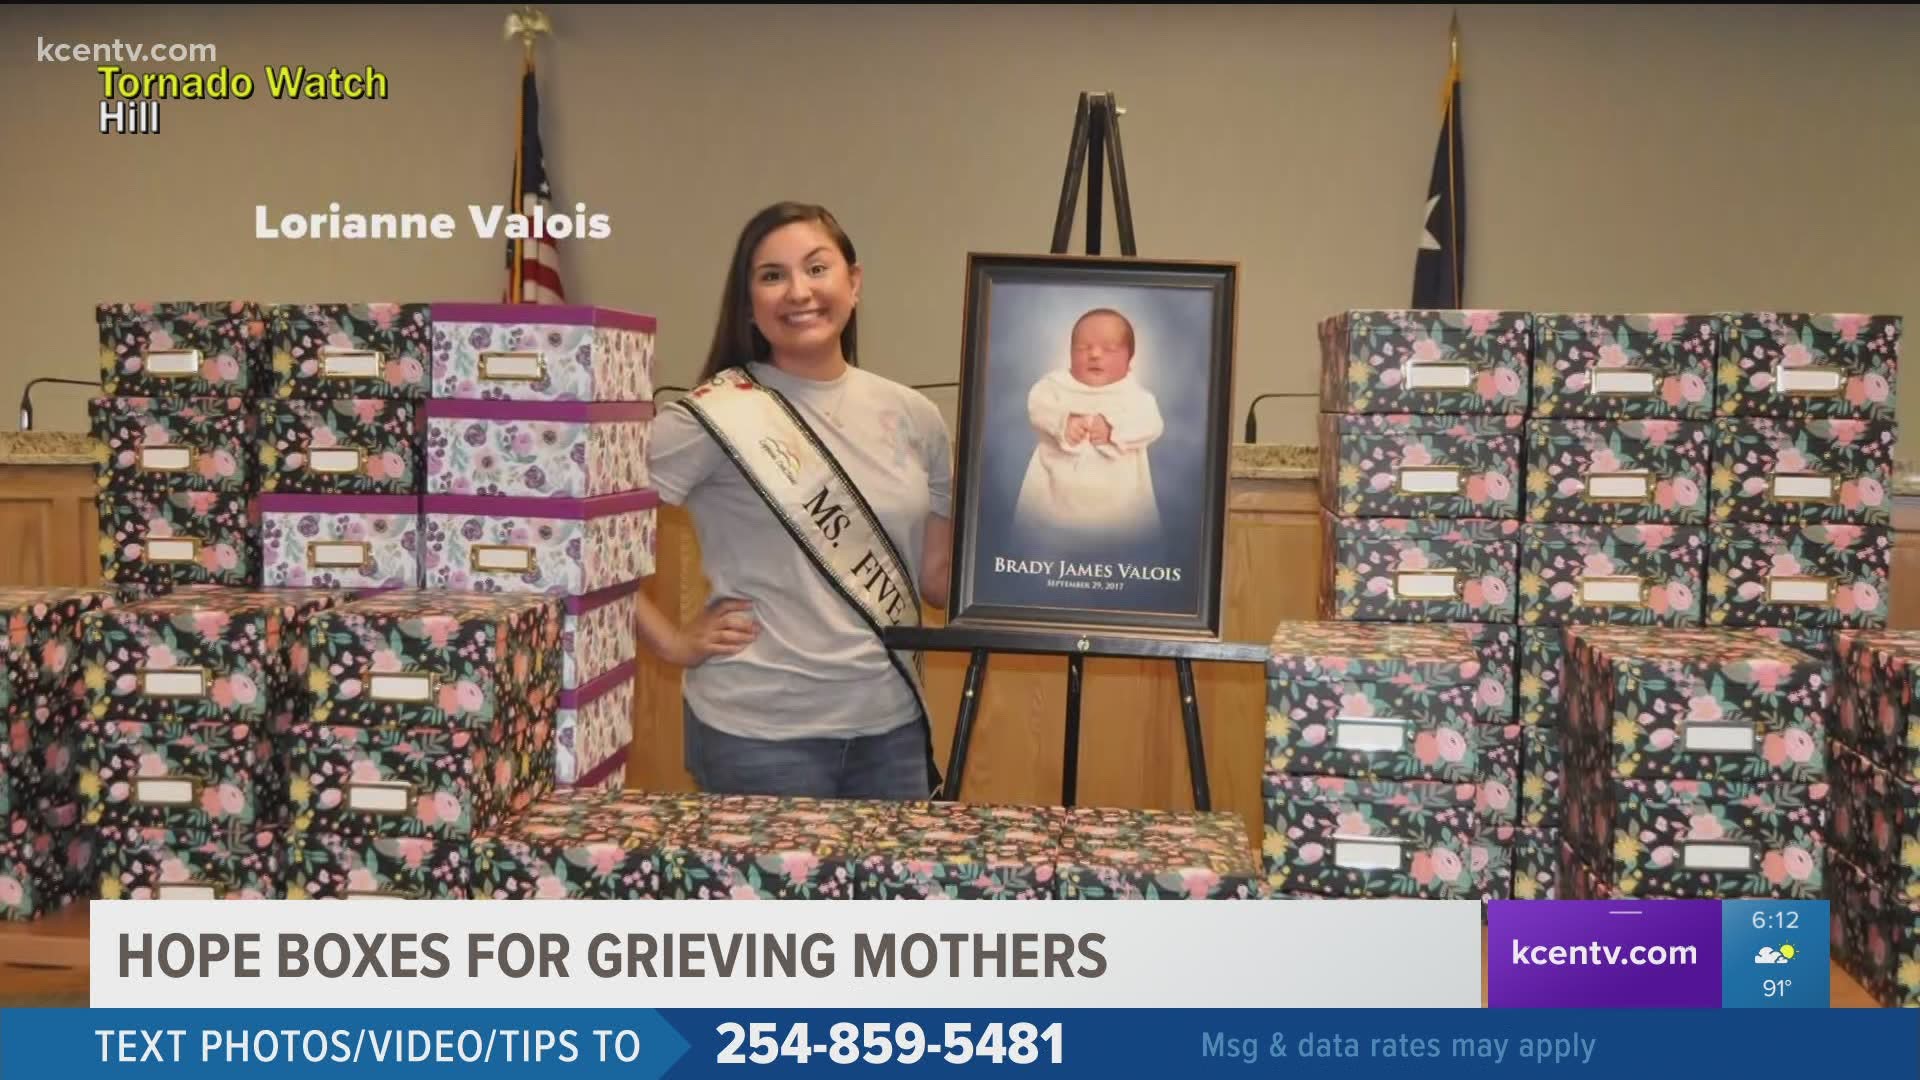 A total of 60 boxes are set to be distributed to three local hospitals to help mothers during their toughest moments.